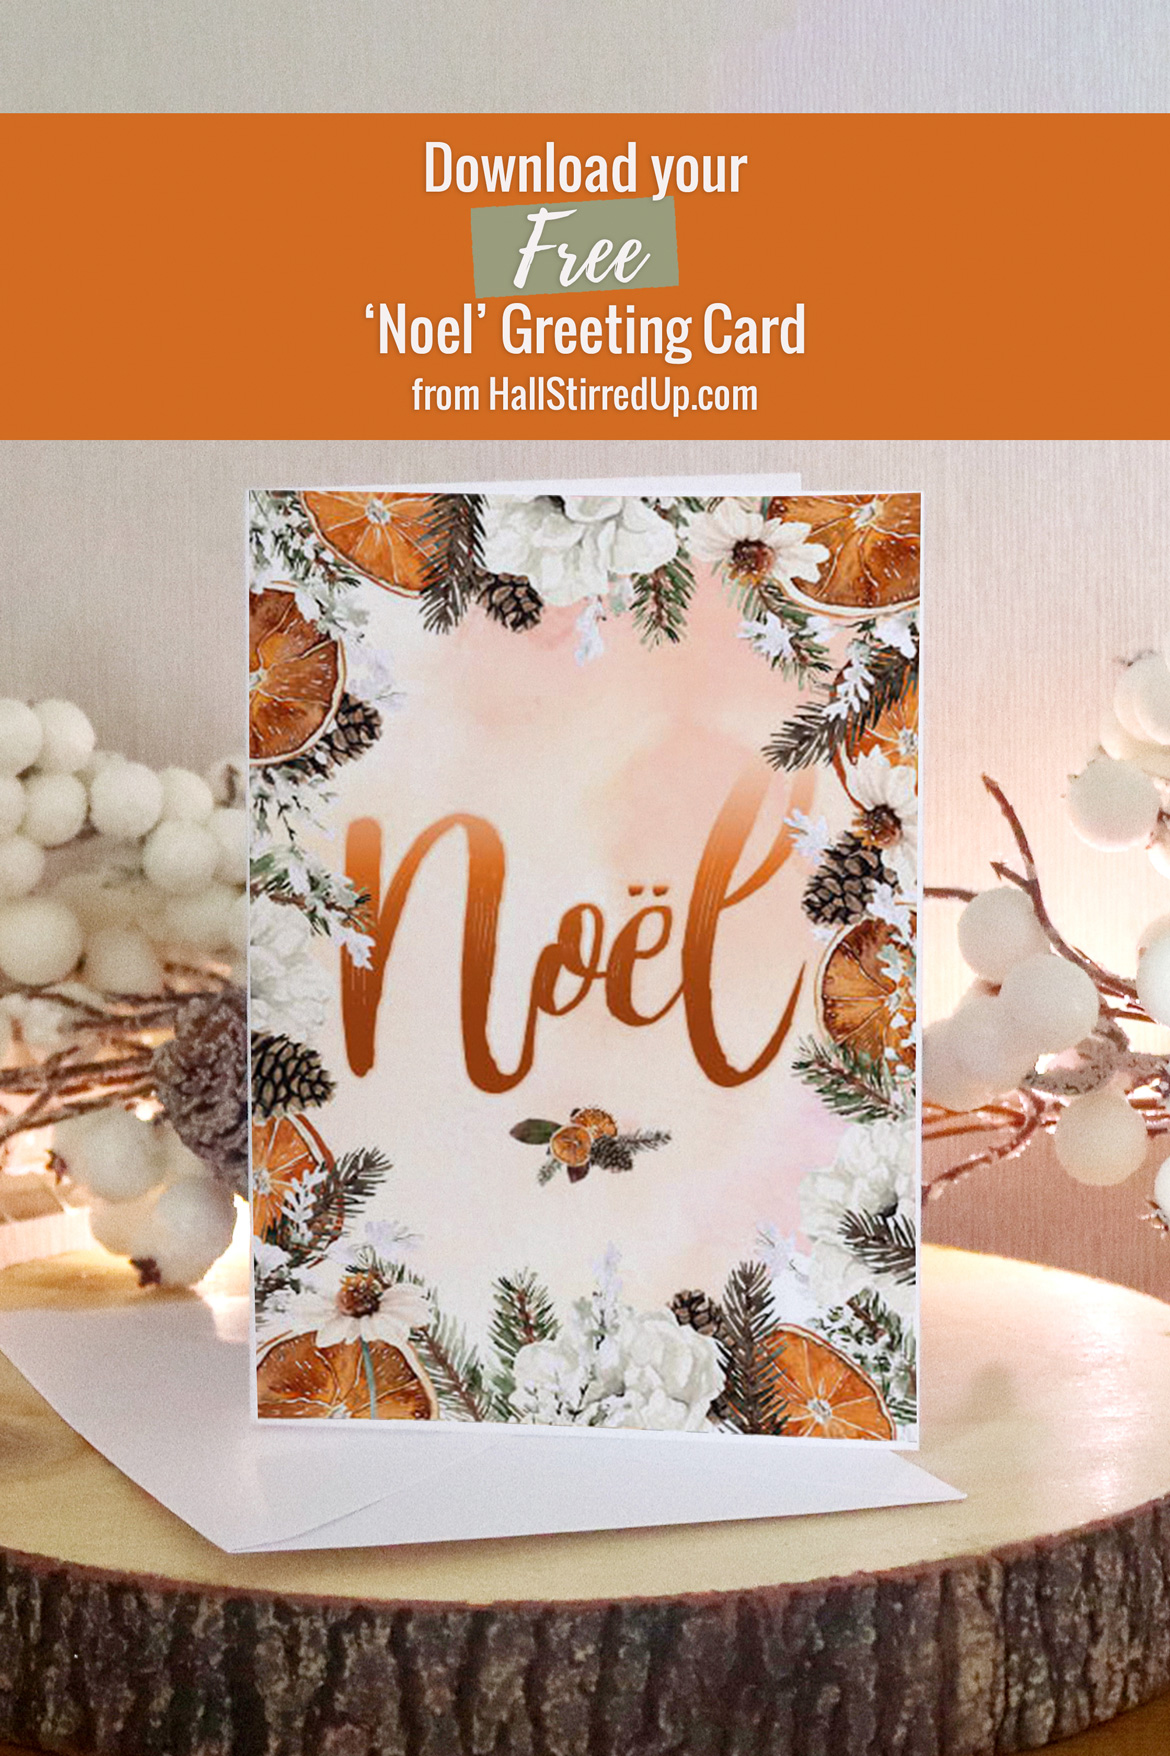 Send Christmas greetings with a pretty Noel greeting card